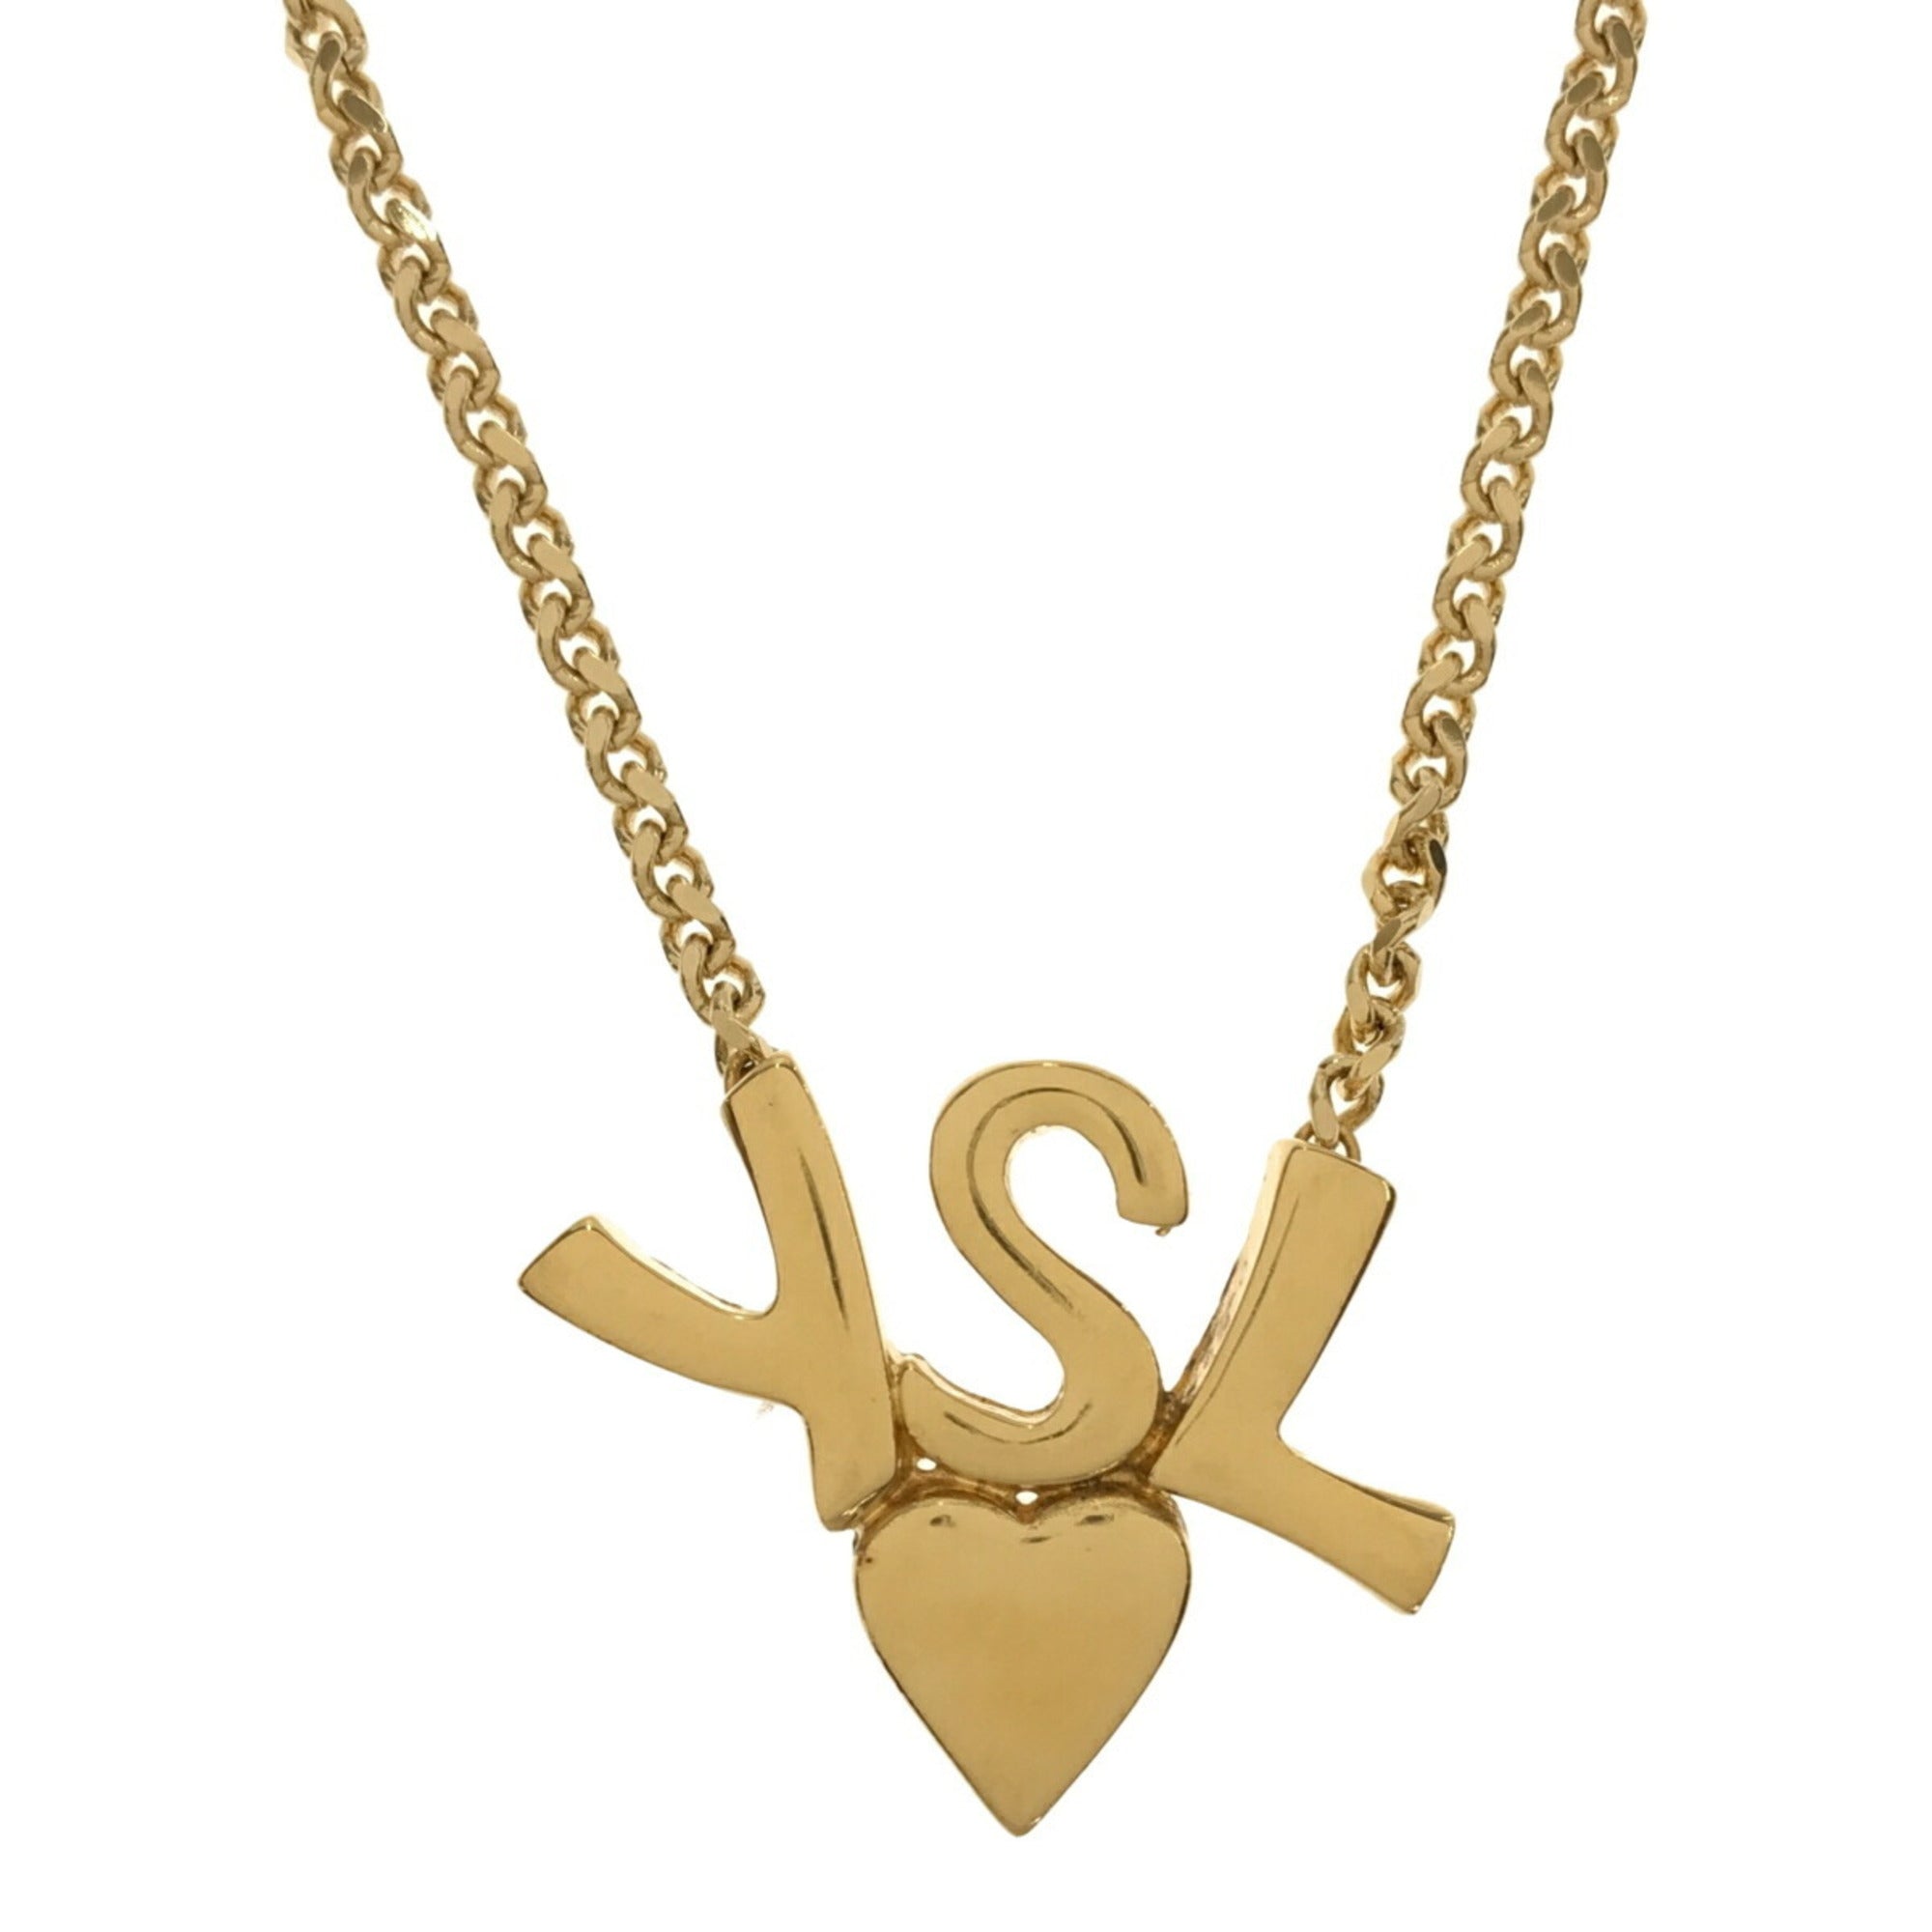 Yves Saint Laurent Necklace Gold GP Ysl Rhinestone Jewelry Stone Square Long Chain Ladies Plated